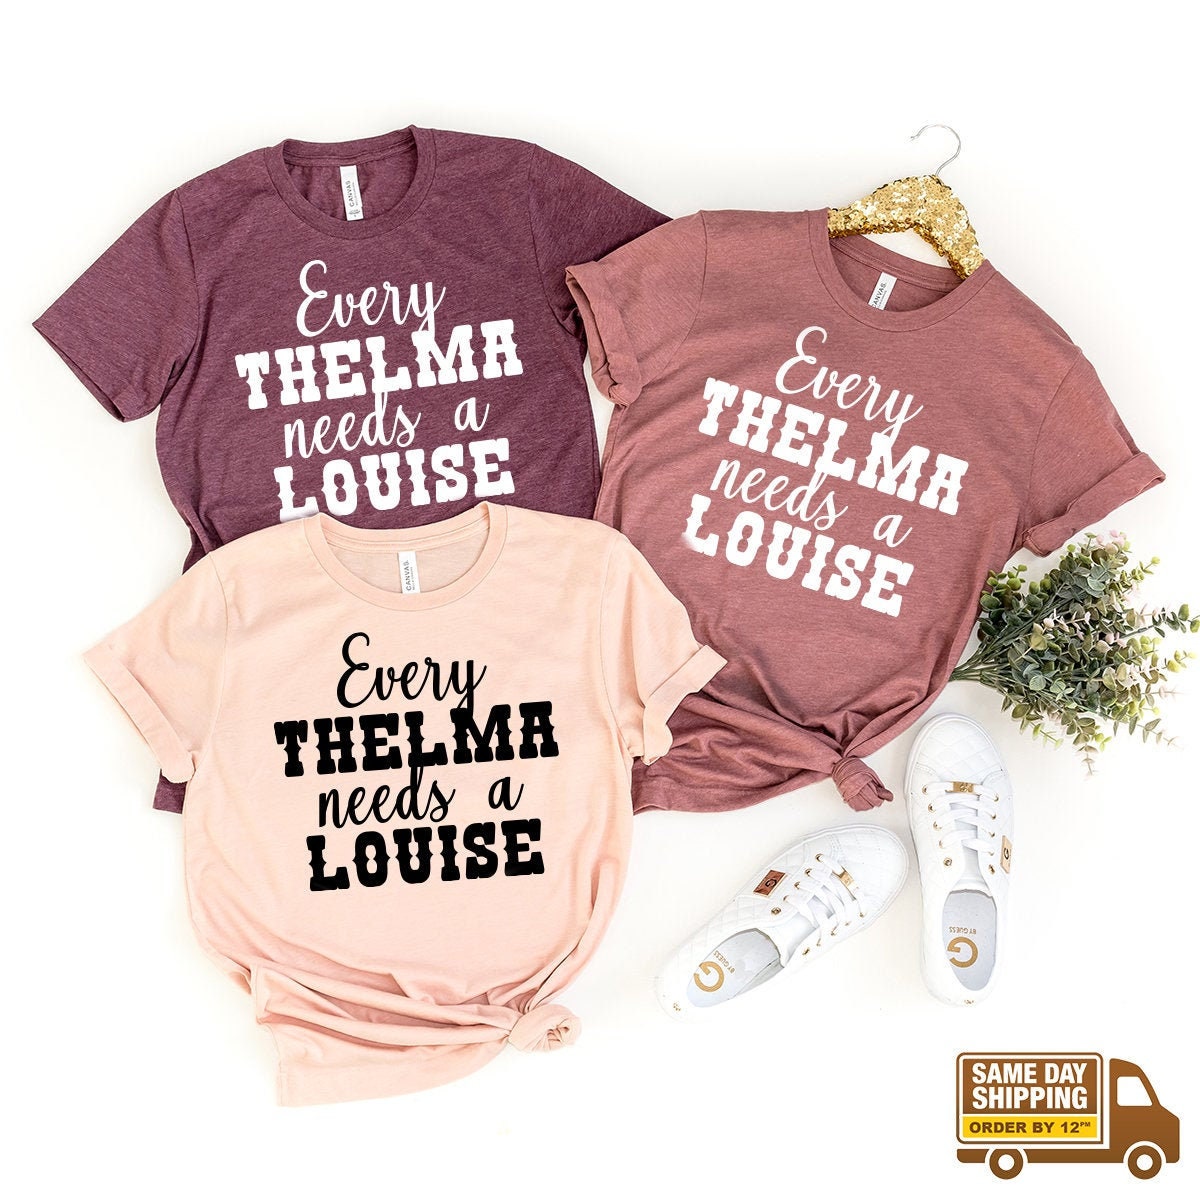  Thelma and Louise, Best Friends Hoodie, Every Thelma Needs a  Louise Hooded Shirt, Ride or Die, Matching Friends, Best Friend Gift,  Bestie Gift, Gift for Girlfriend, Gifts for Couples : Handmade